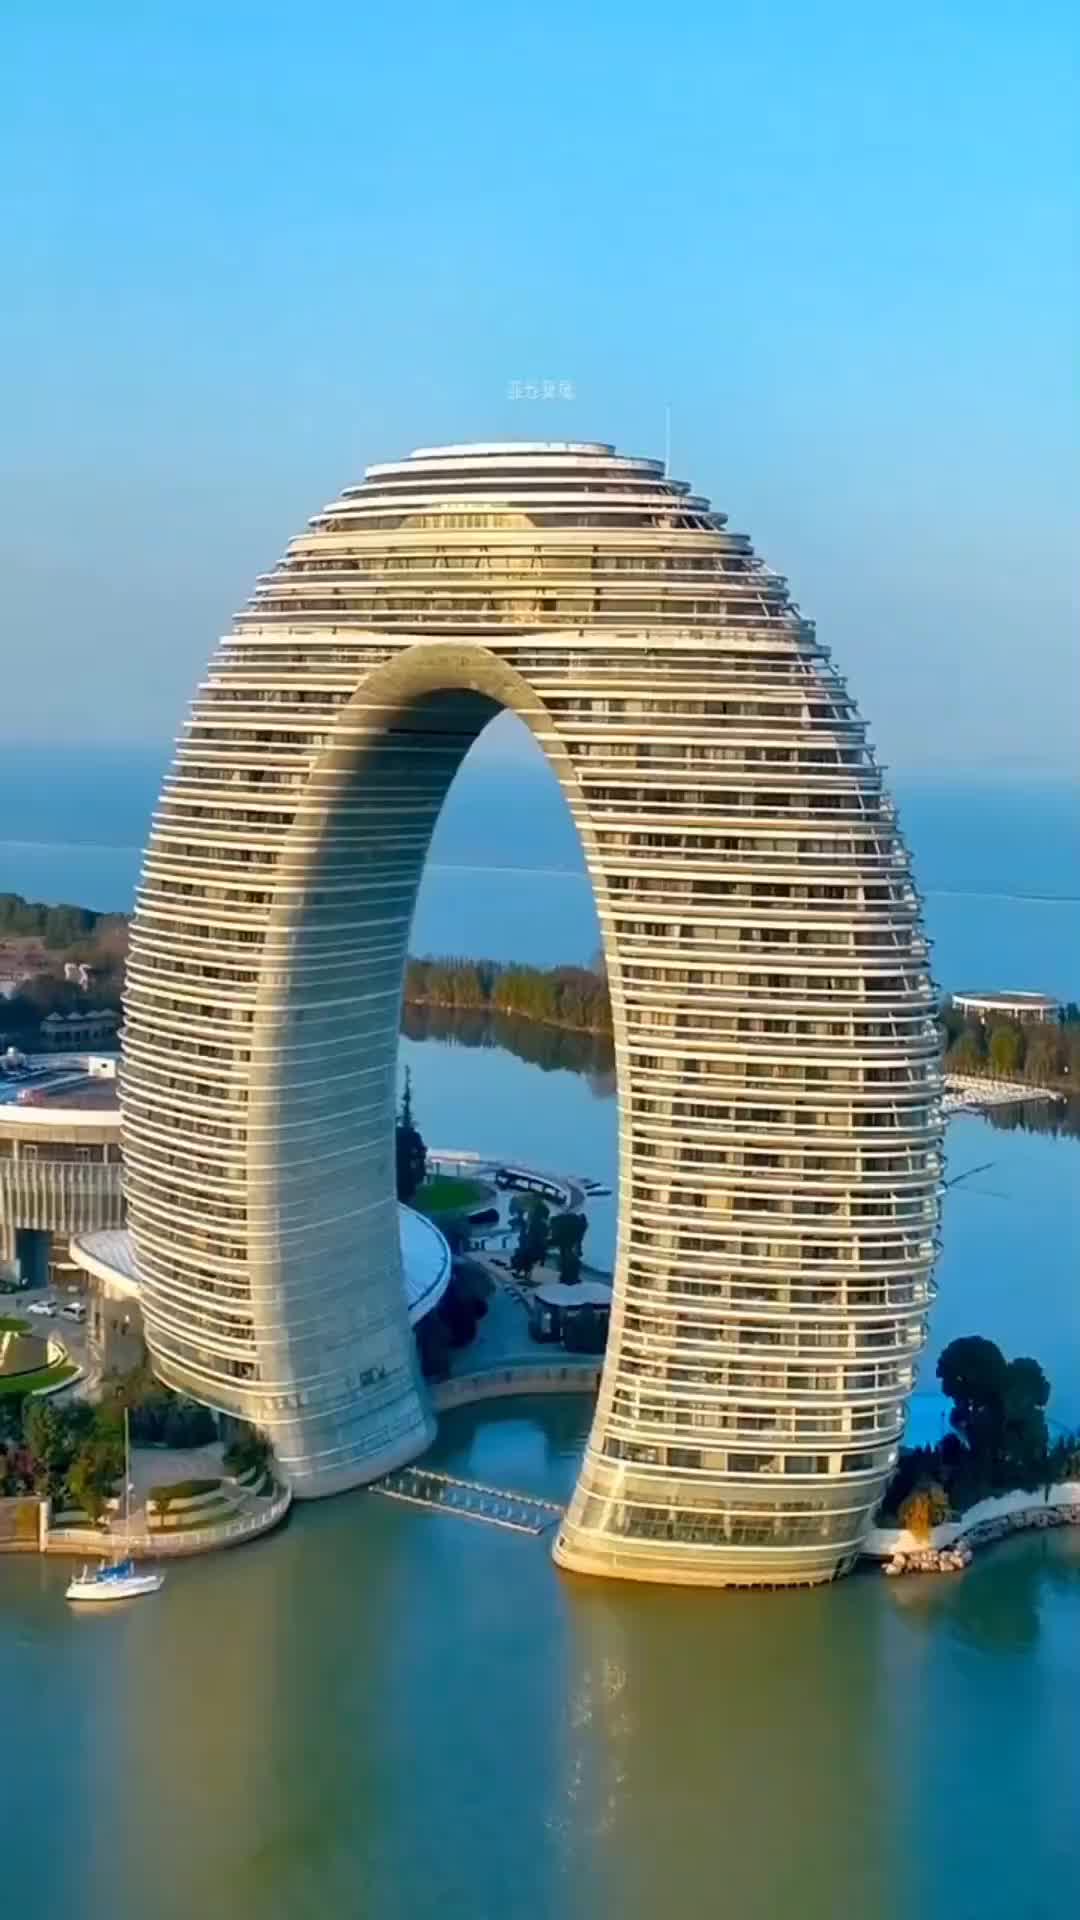 The Moon Bay Hotel: $1.5 Billion Toilet Cover in China